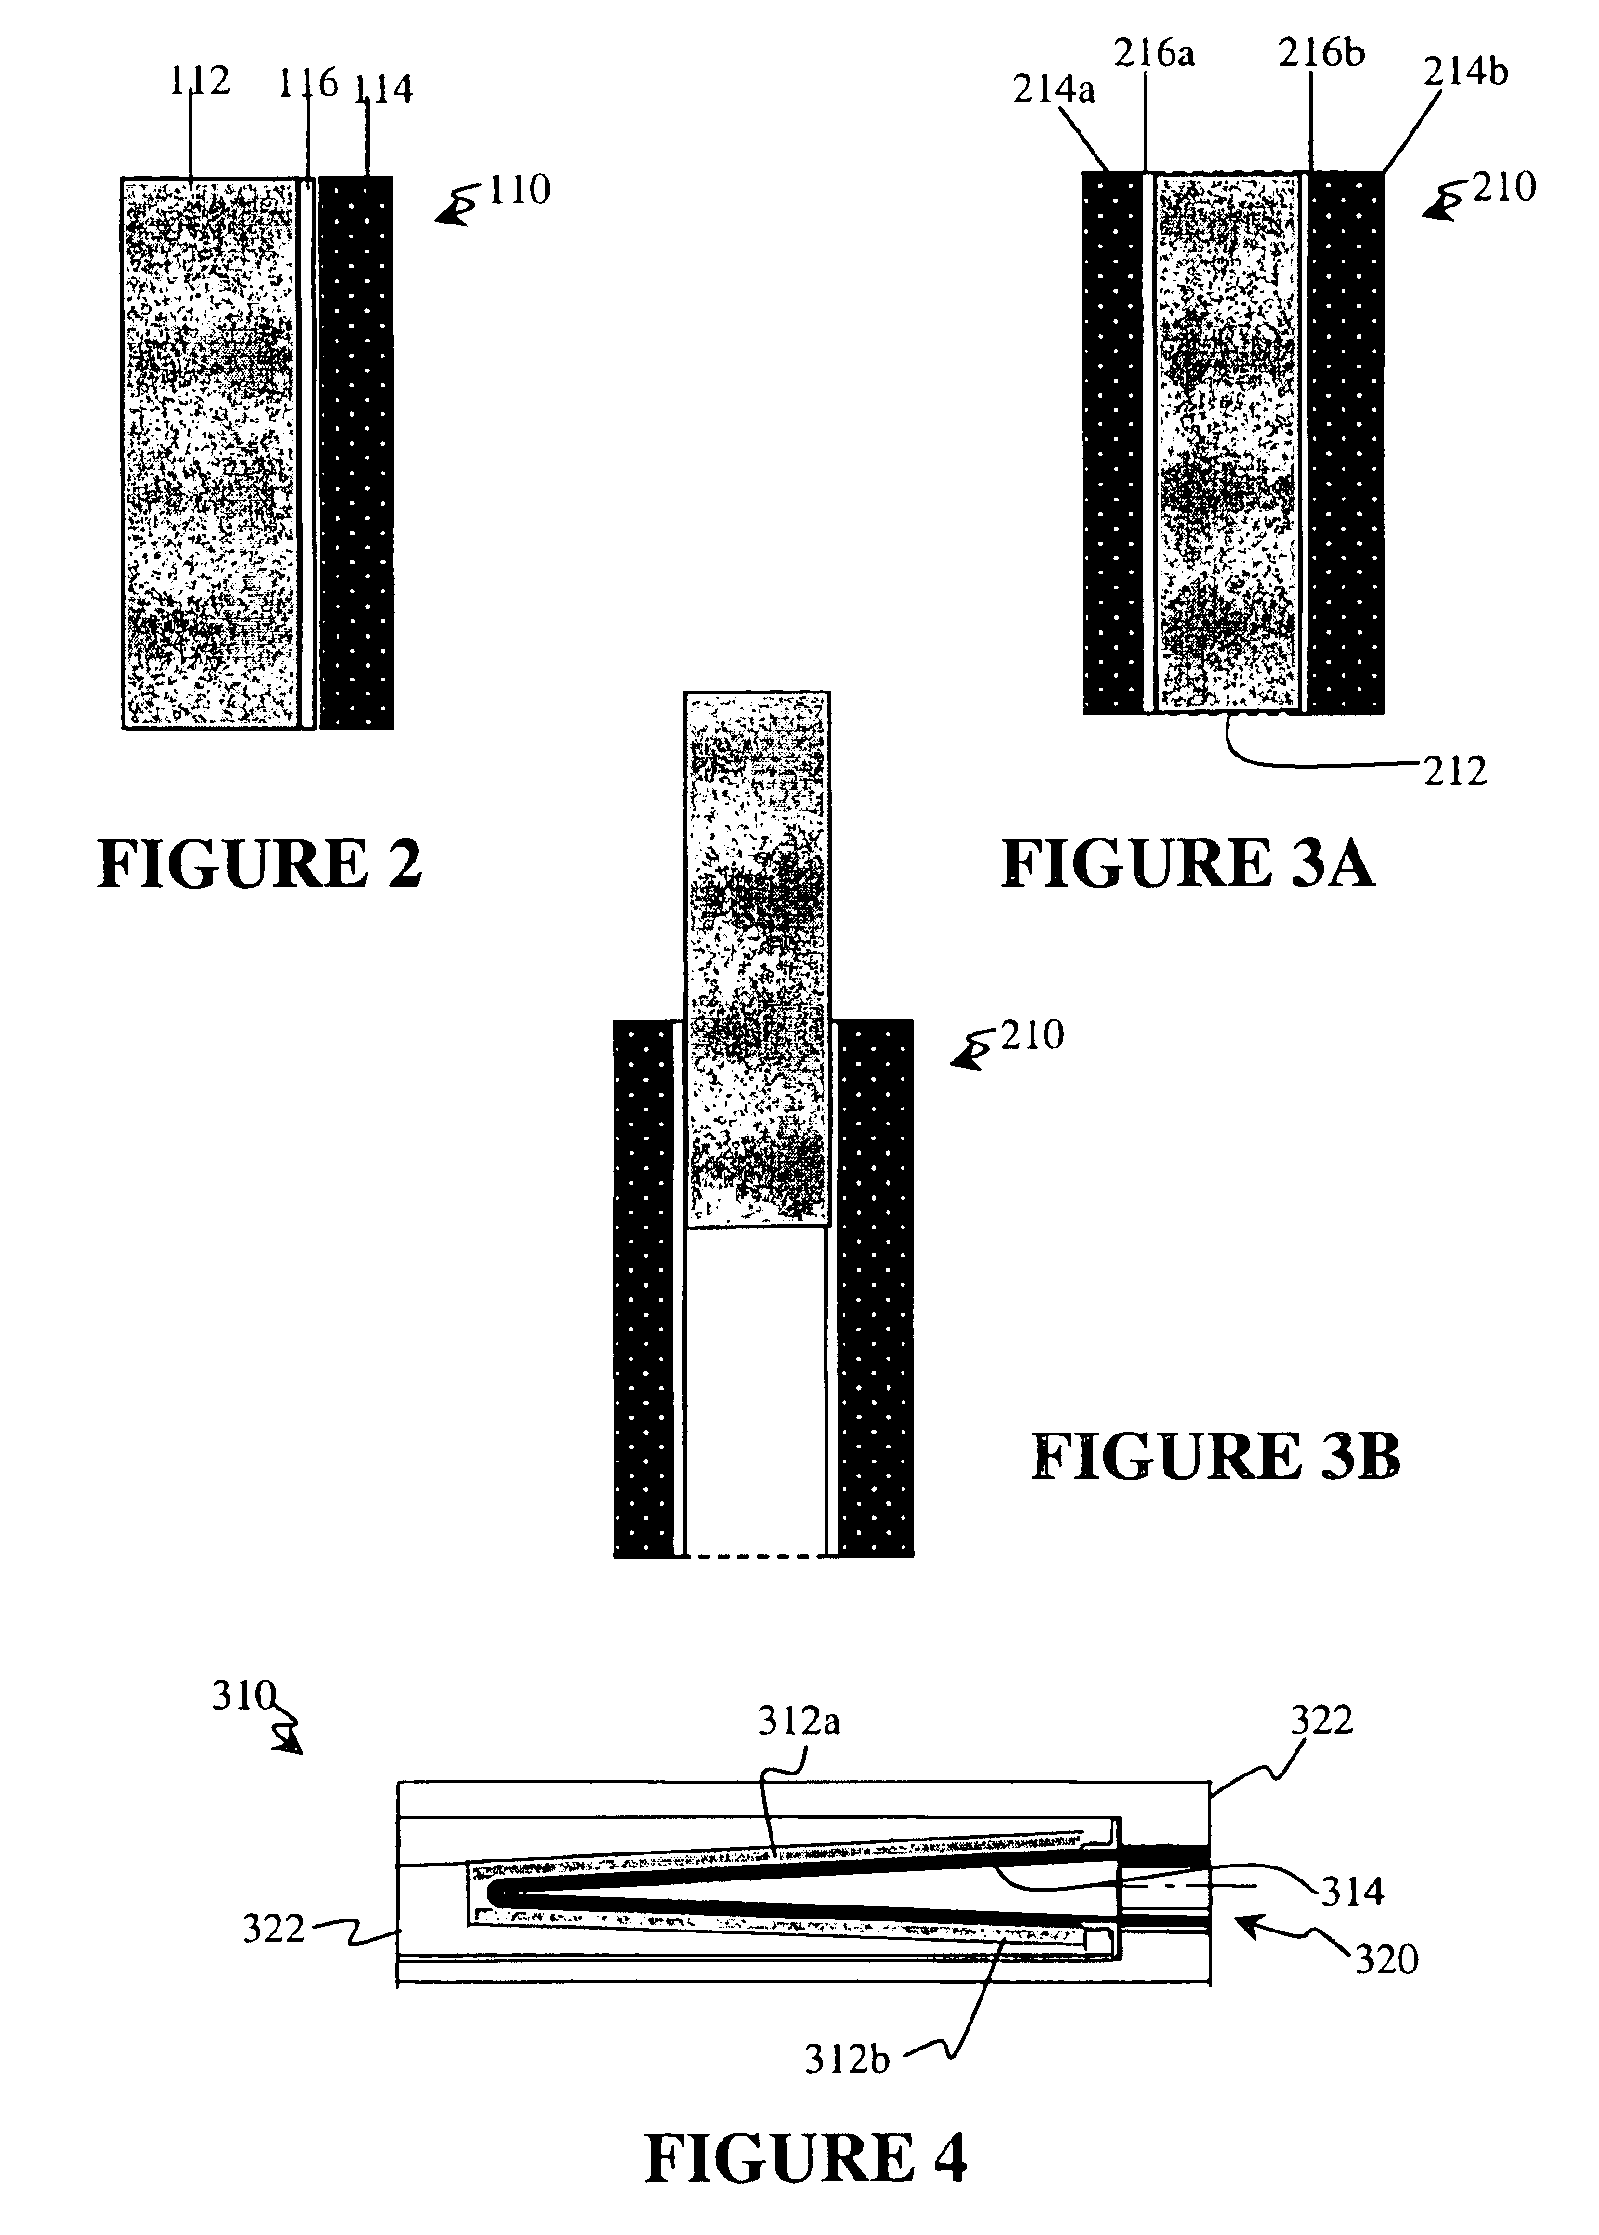 Anode structure for metal air electrochemical cells